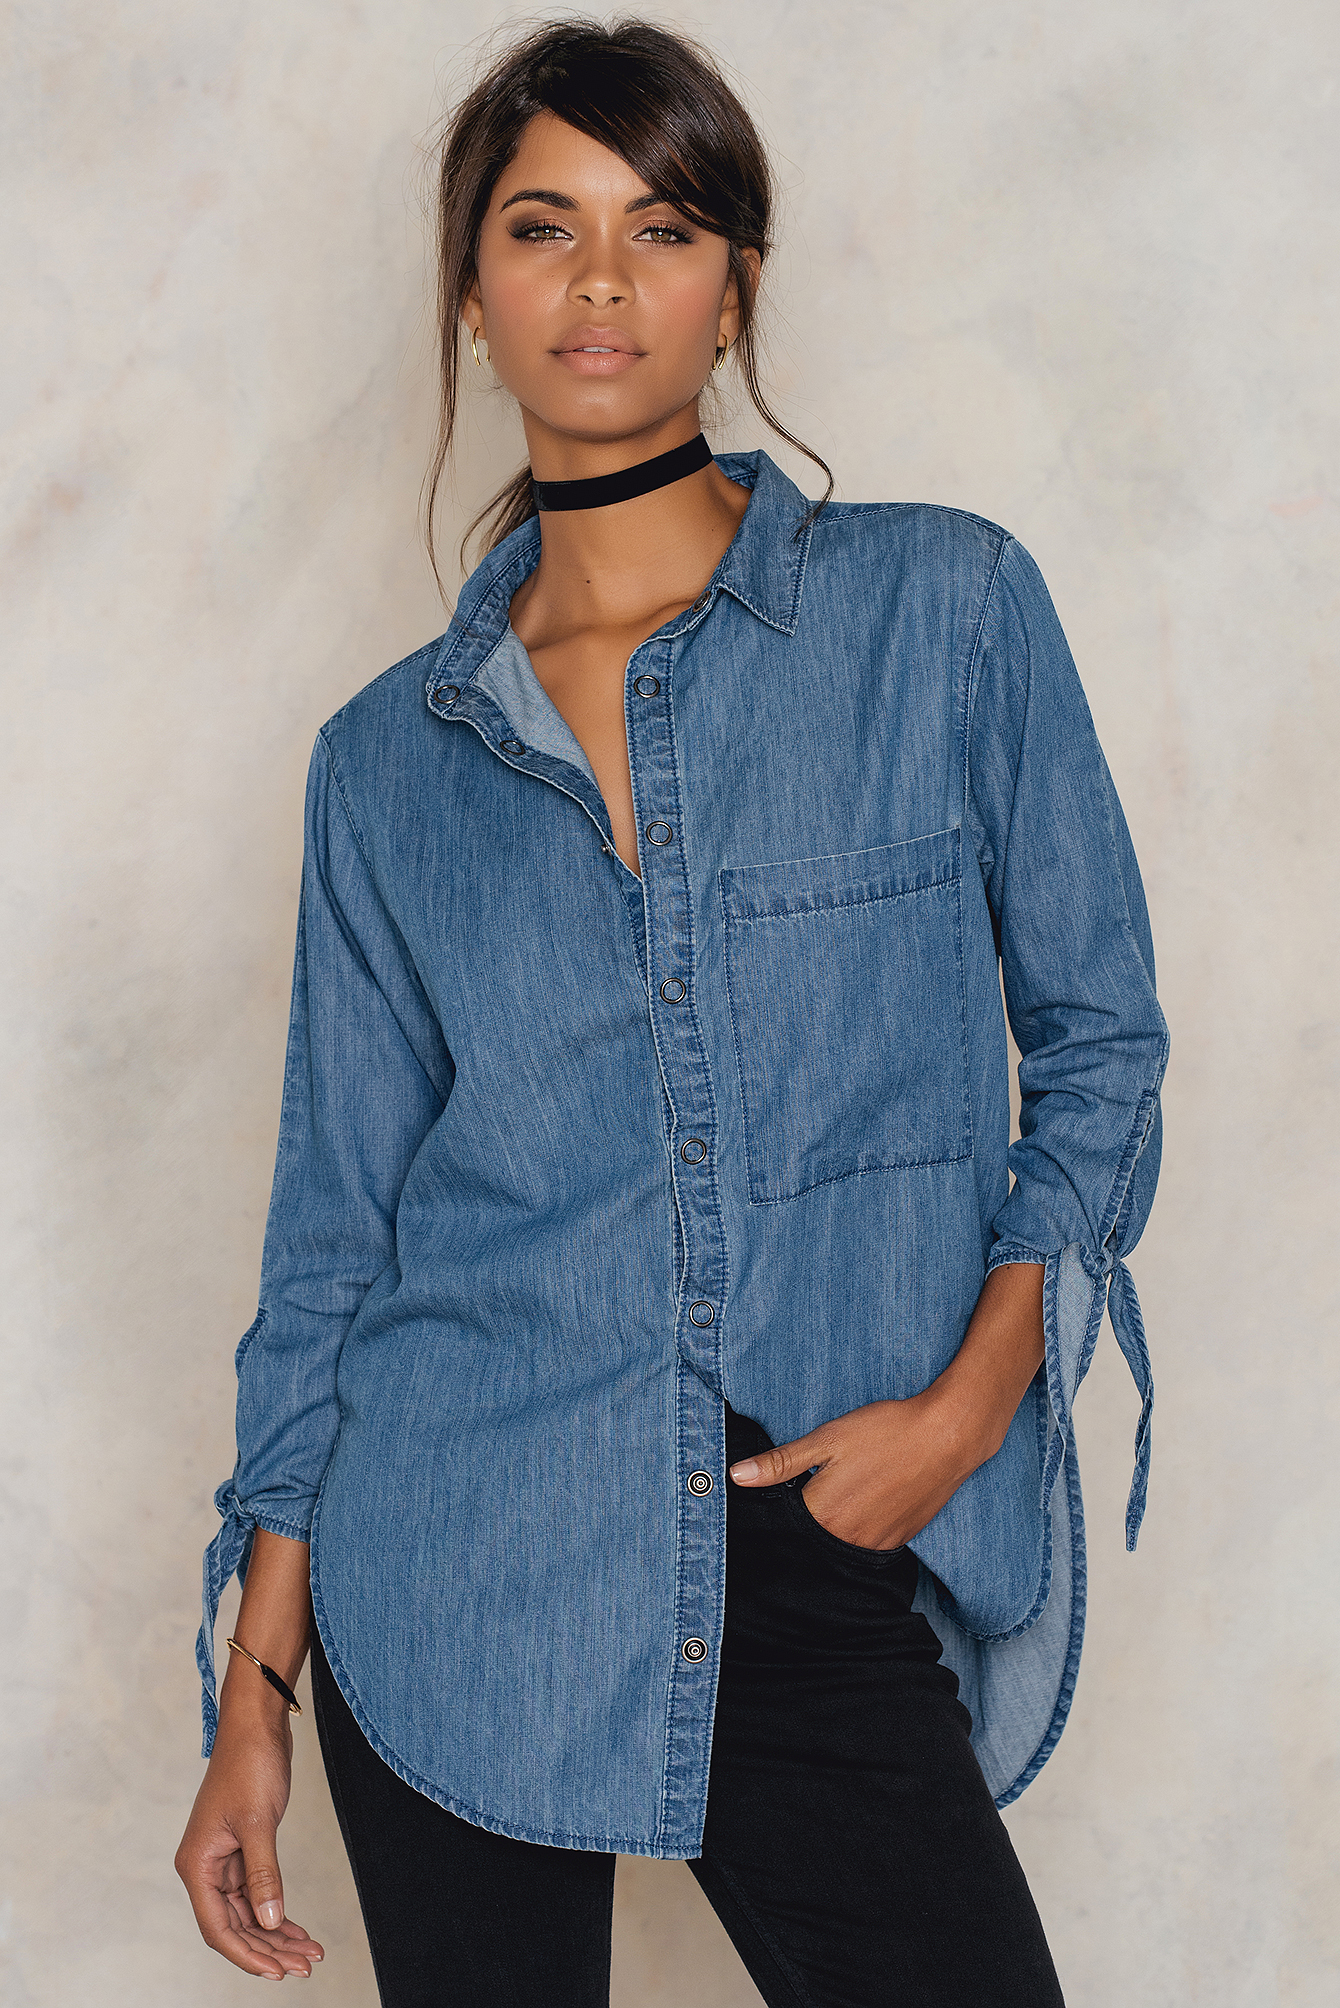 How-To Style: Side Knot Shirt & Denim Outfit - A Good Hue